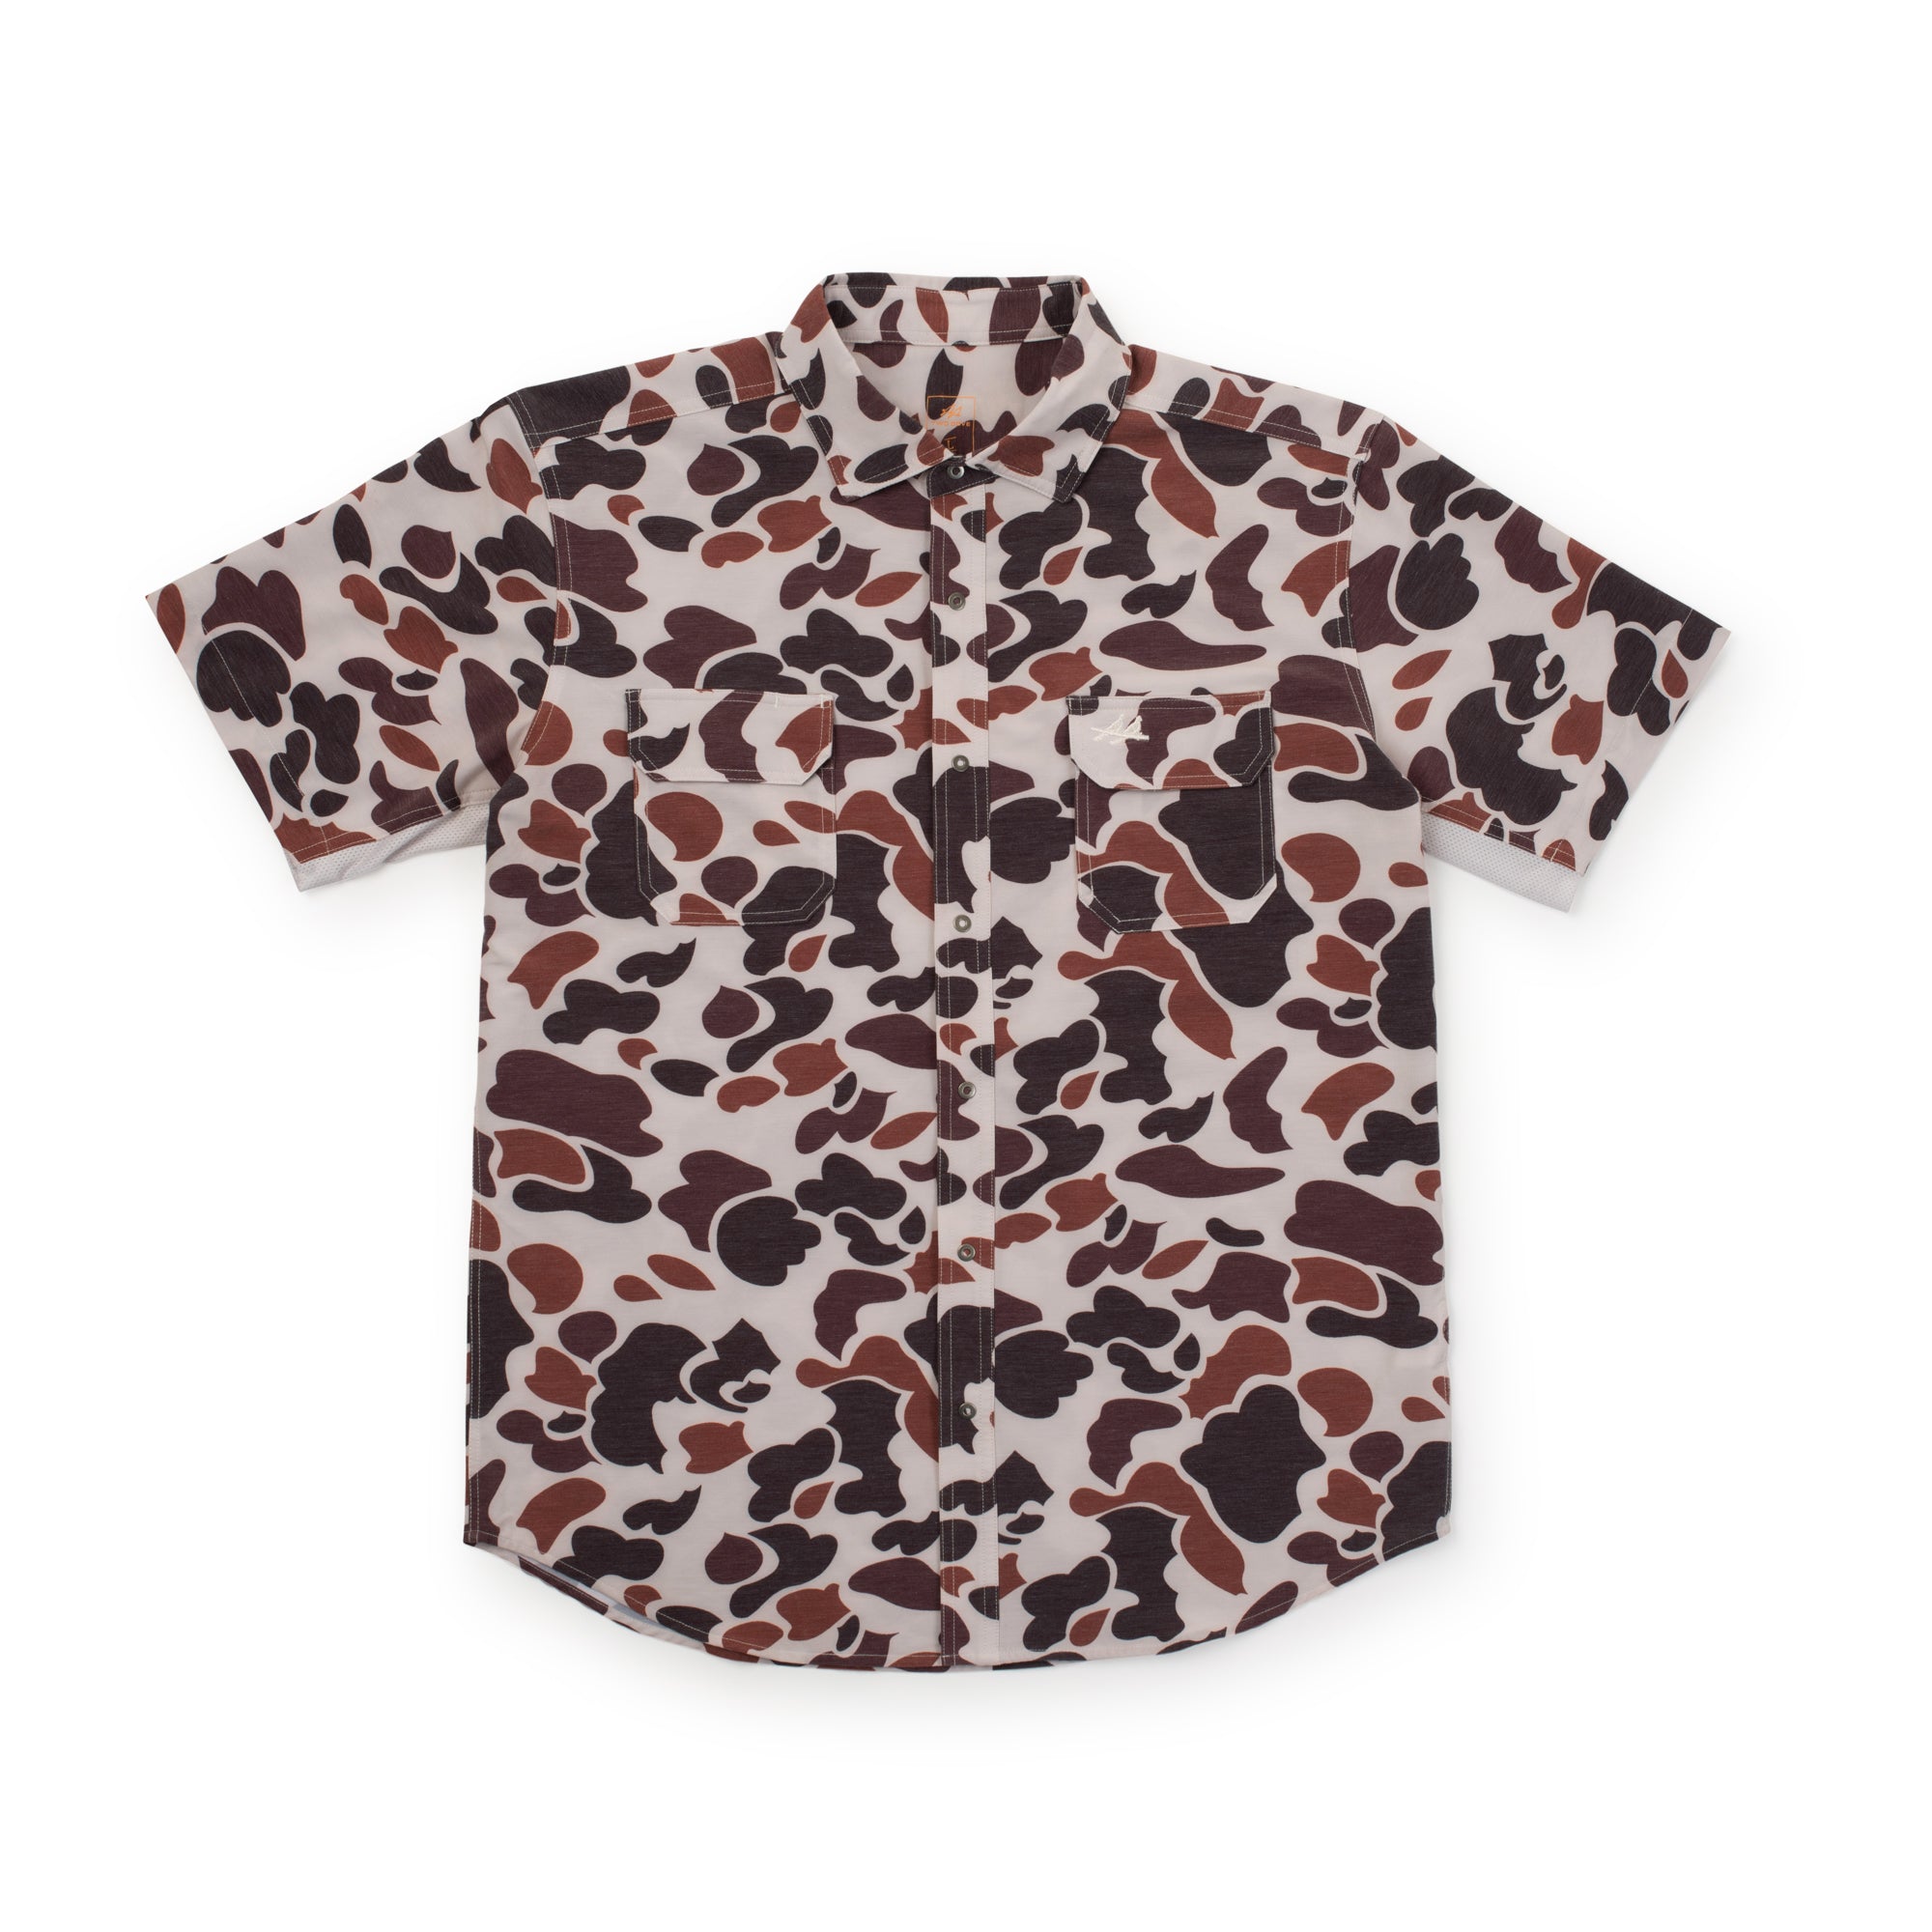 "The Rio" Ultimate Outdoor Blend Vintage Boone Camo - Short Sleeve